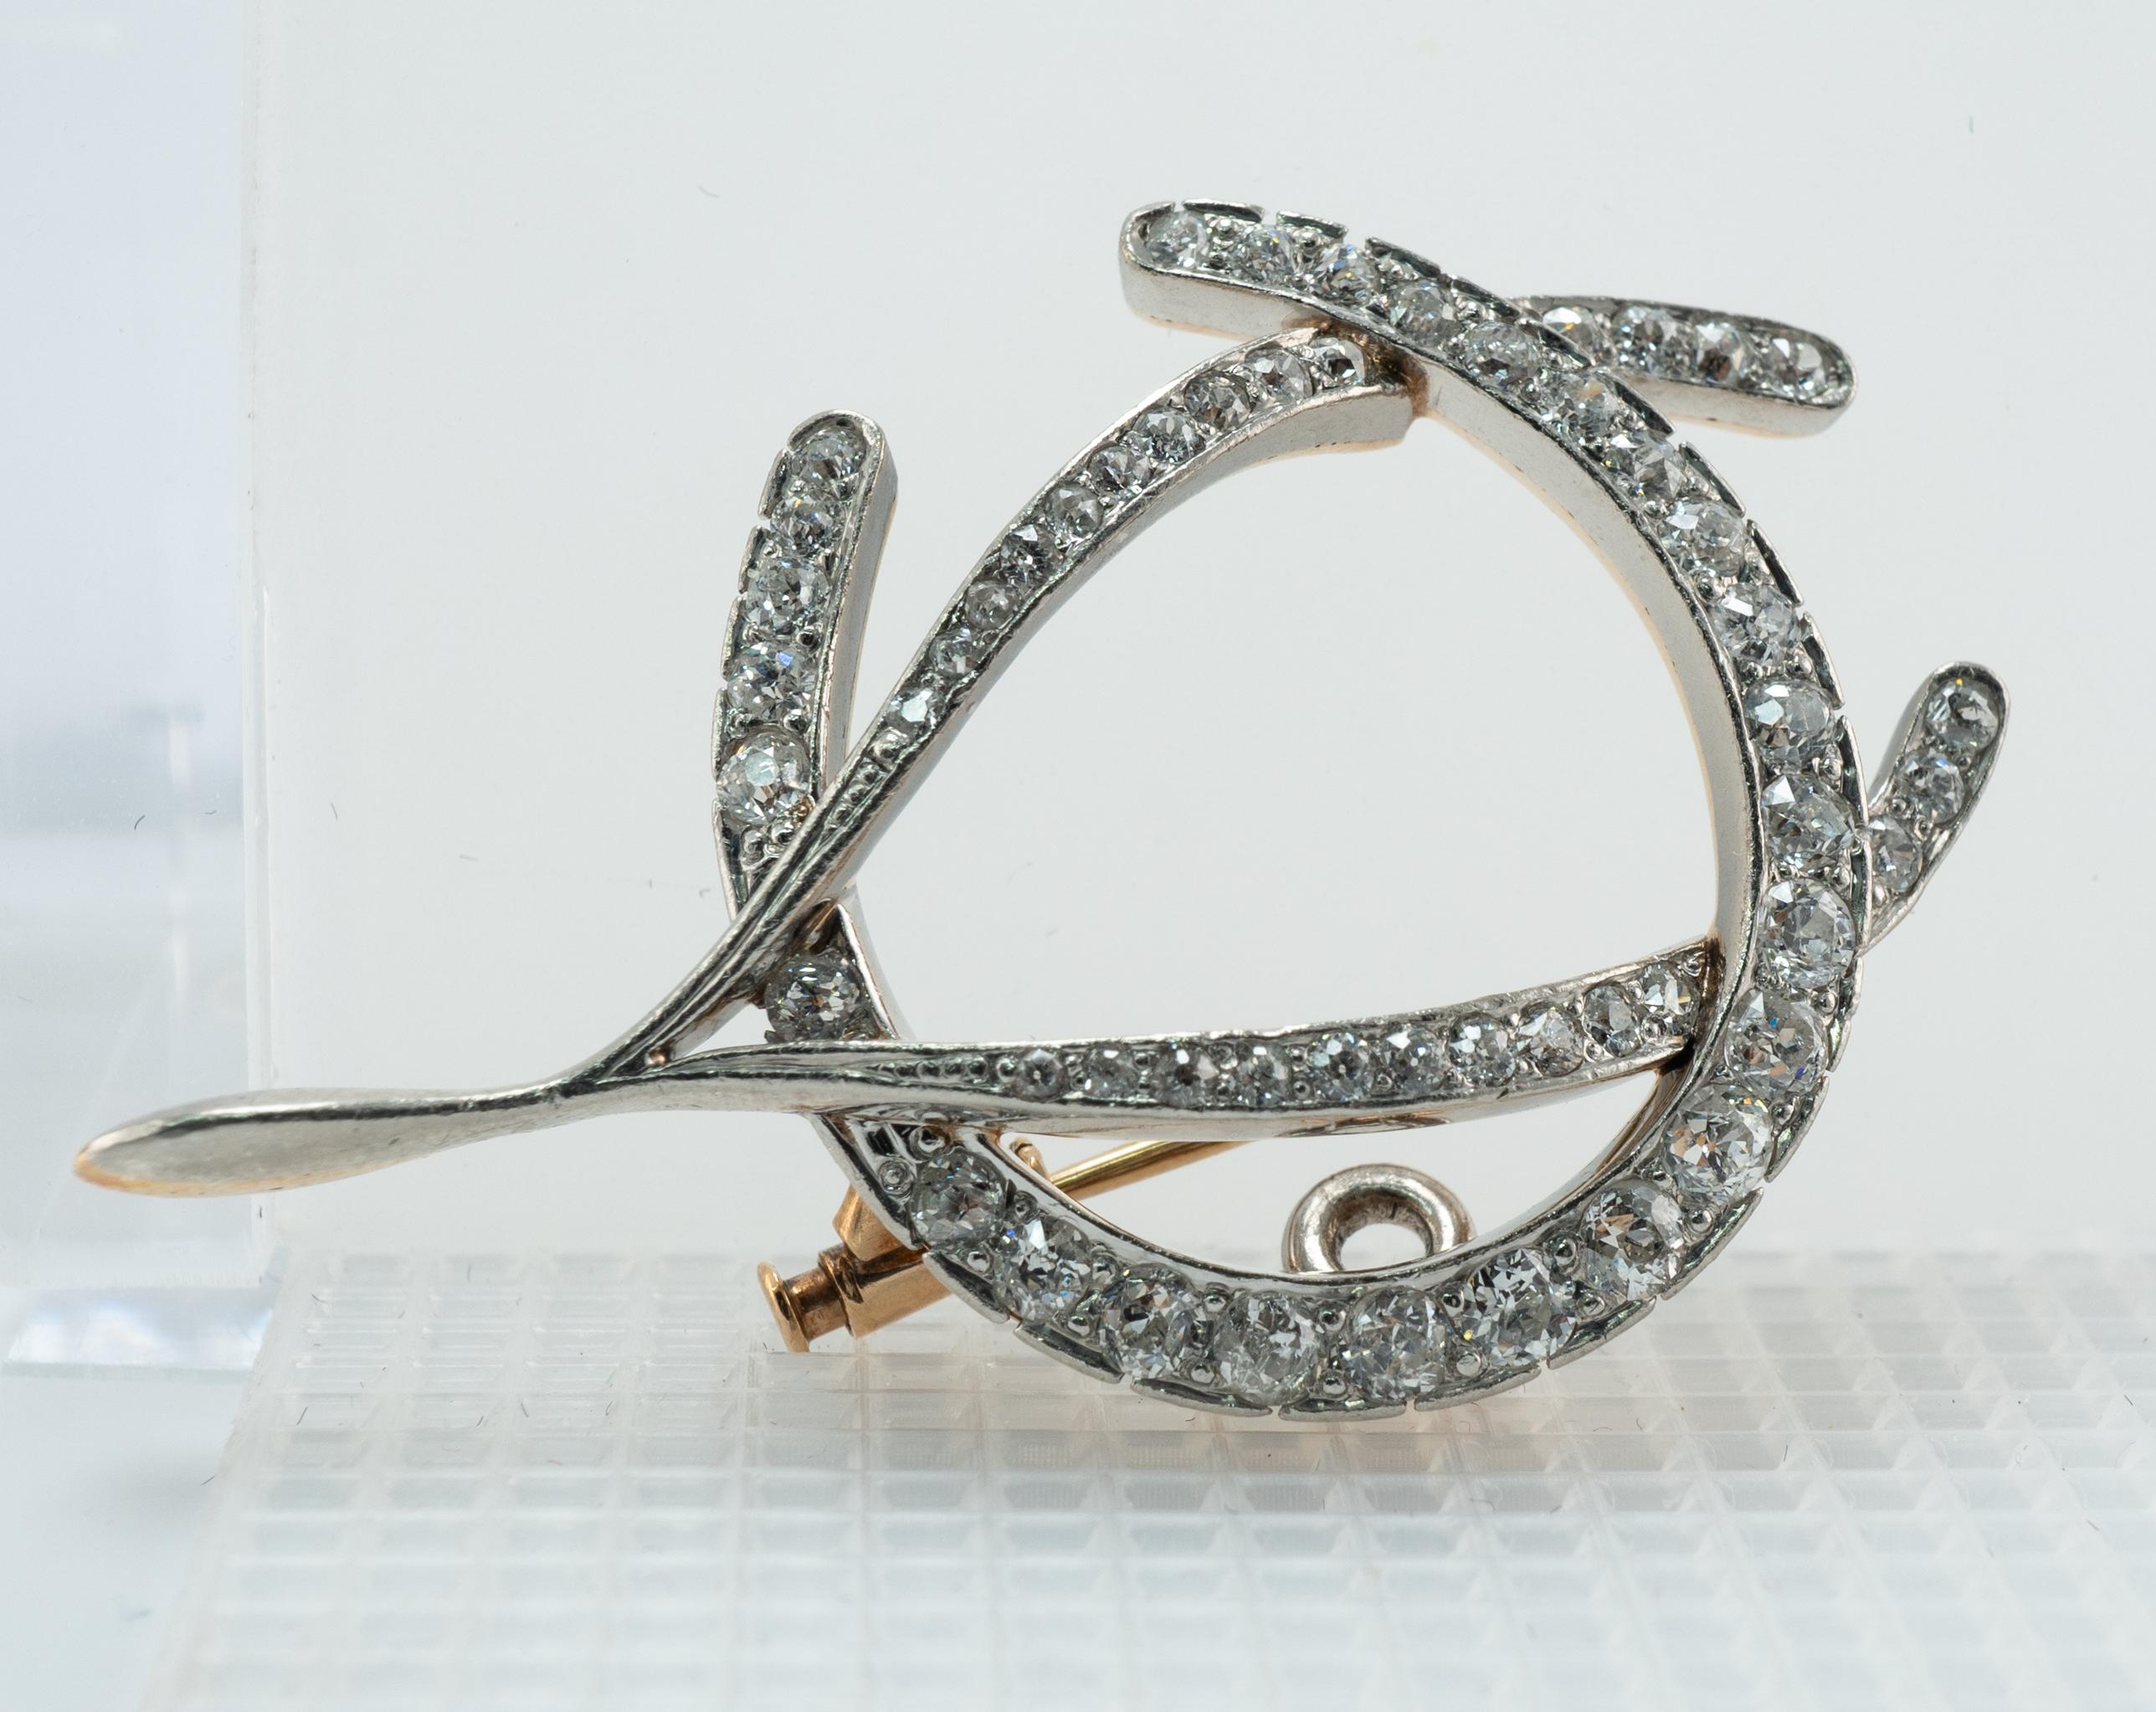 Edwardian Old Mine Diamond Wishbone Brooch Pin Pendant 14K Gold

This gorgeous Edwardian circa 1890-1910s Brooch Pin is crafted in Platinum for the top, and 14K Yellow gold for the pin and clasp.
The metal has been tested by applying nitric